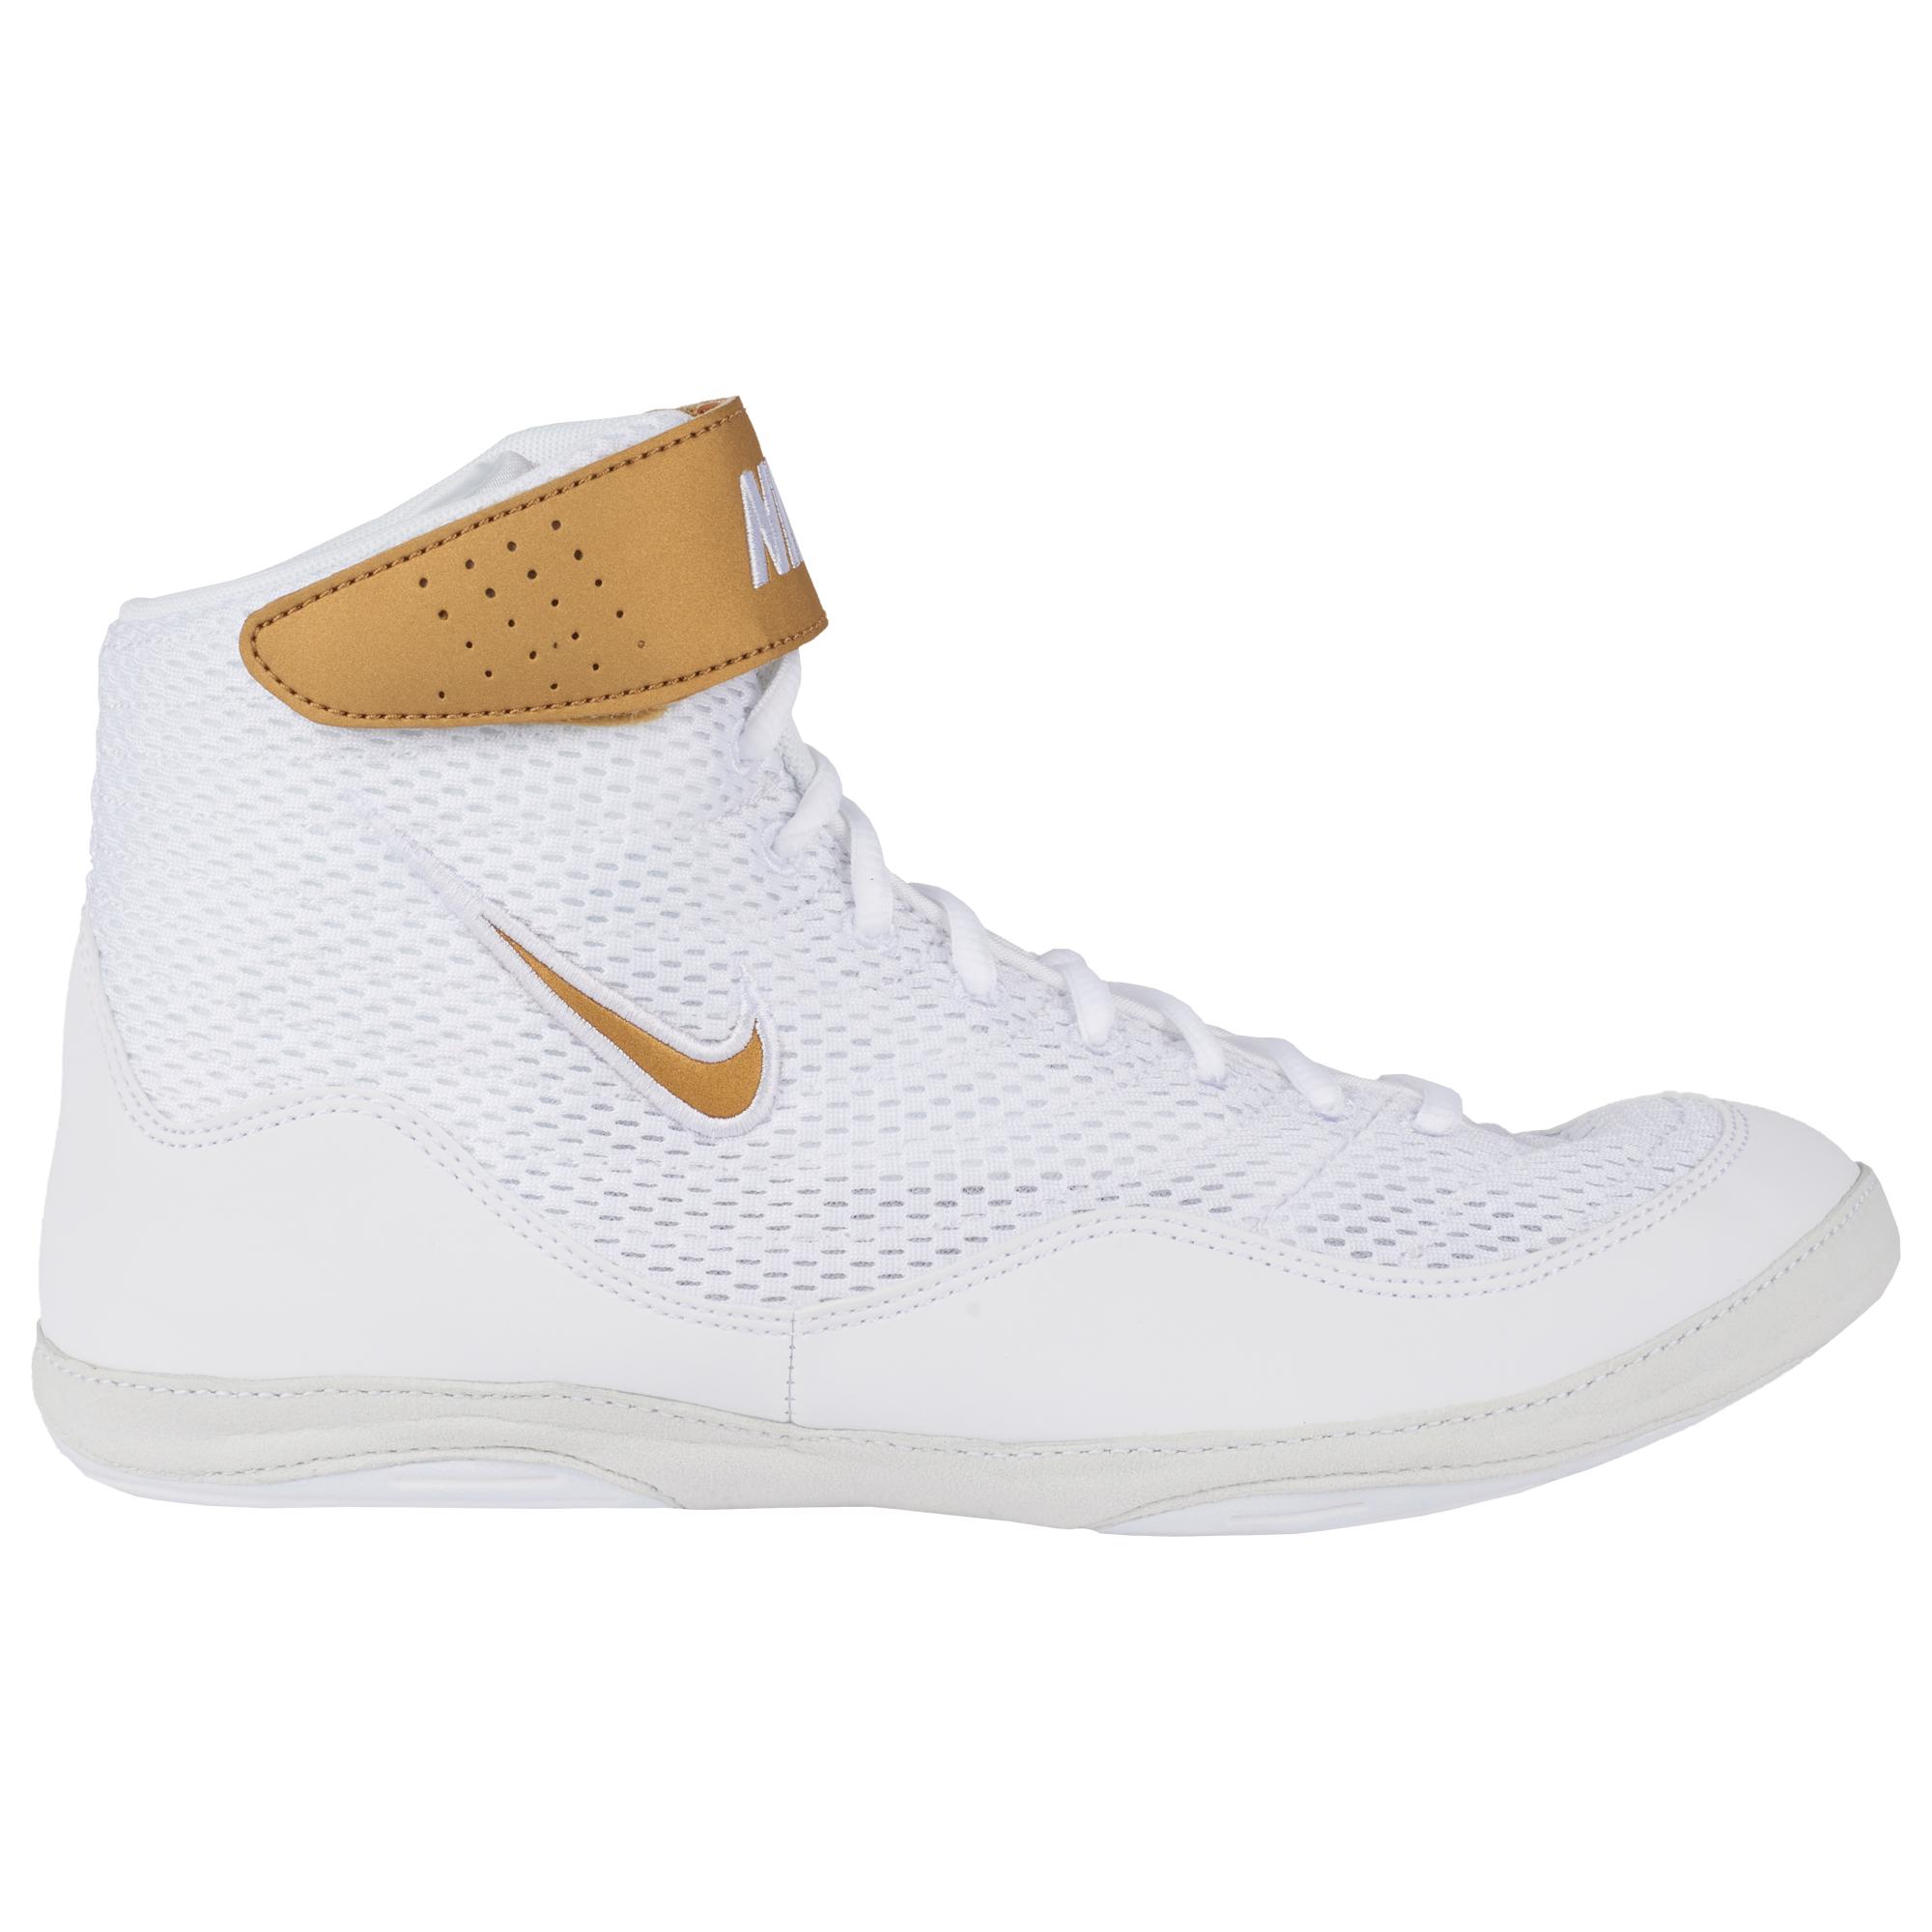 Nike Rubber Inflict 3 Wrestling Shoes in White/Metallic Gold (White ...